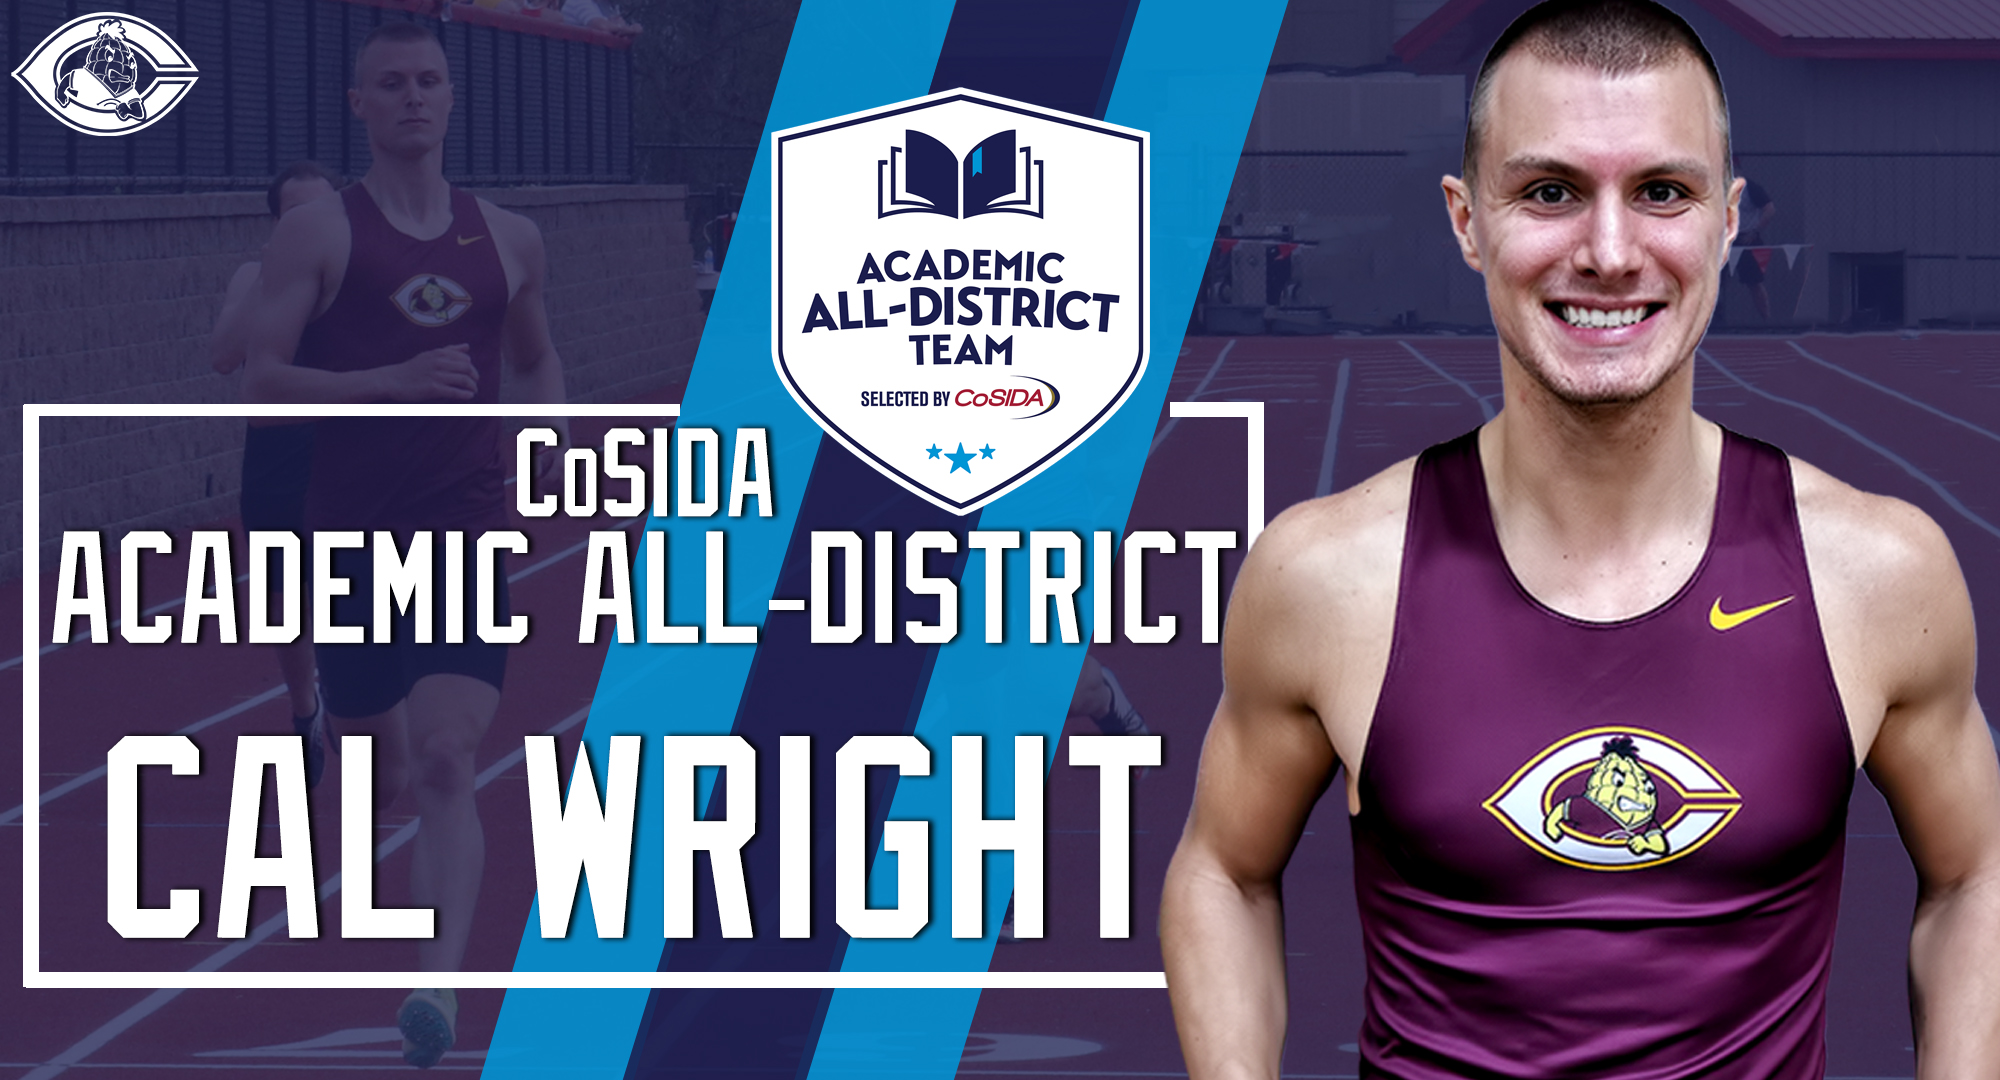 Senior All-American Cal Wright was named to the College CoSIDA Academic All-District 6 Team in Division III track and field/cross country.